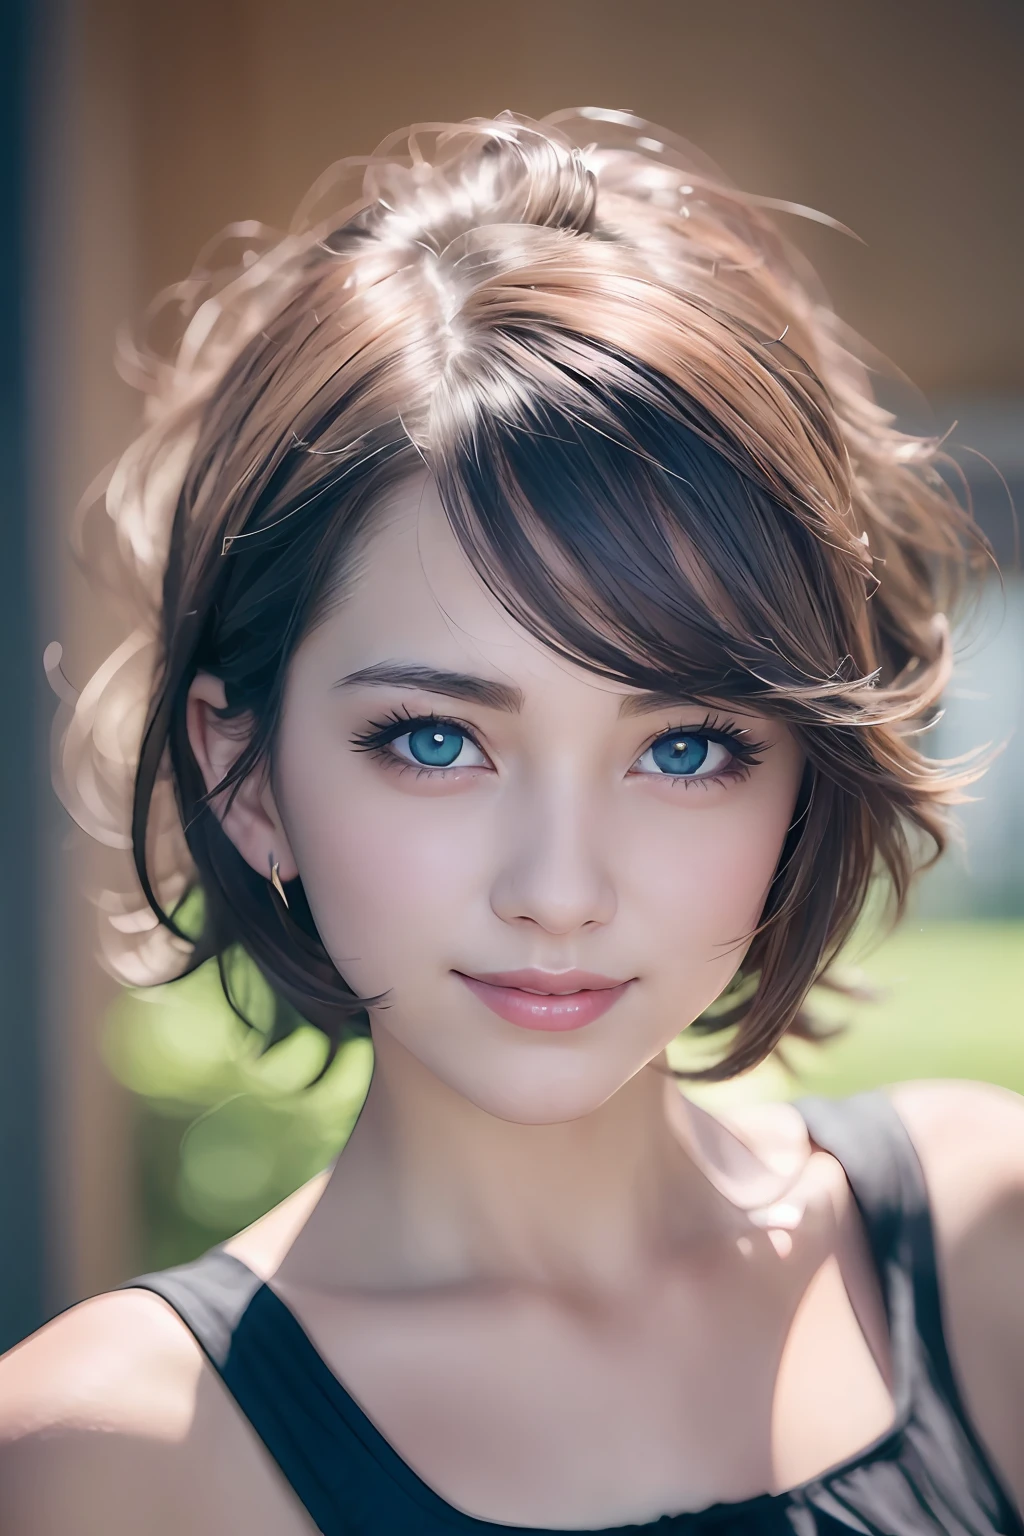 animesque、anime styled、Speciality、Moisturized eyes、Beautiful detailed eyes, (Short hair:1.2),  (8K, Best Quality, masutepiece:1.2), (Realistic, Photorealsitic:1.37), Ultra-detailed, a closeup、portraitures、1 girl, Cute, Blue-golden hair、Solo, (nose blush),(Smile:1.15),